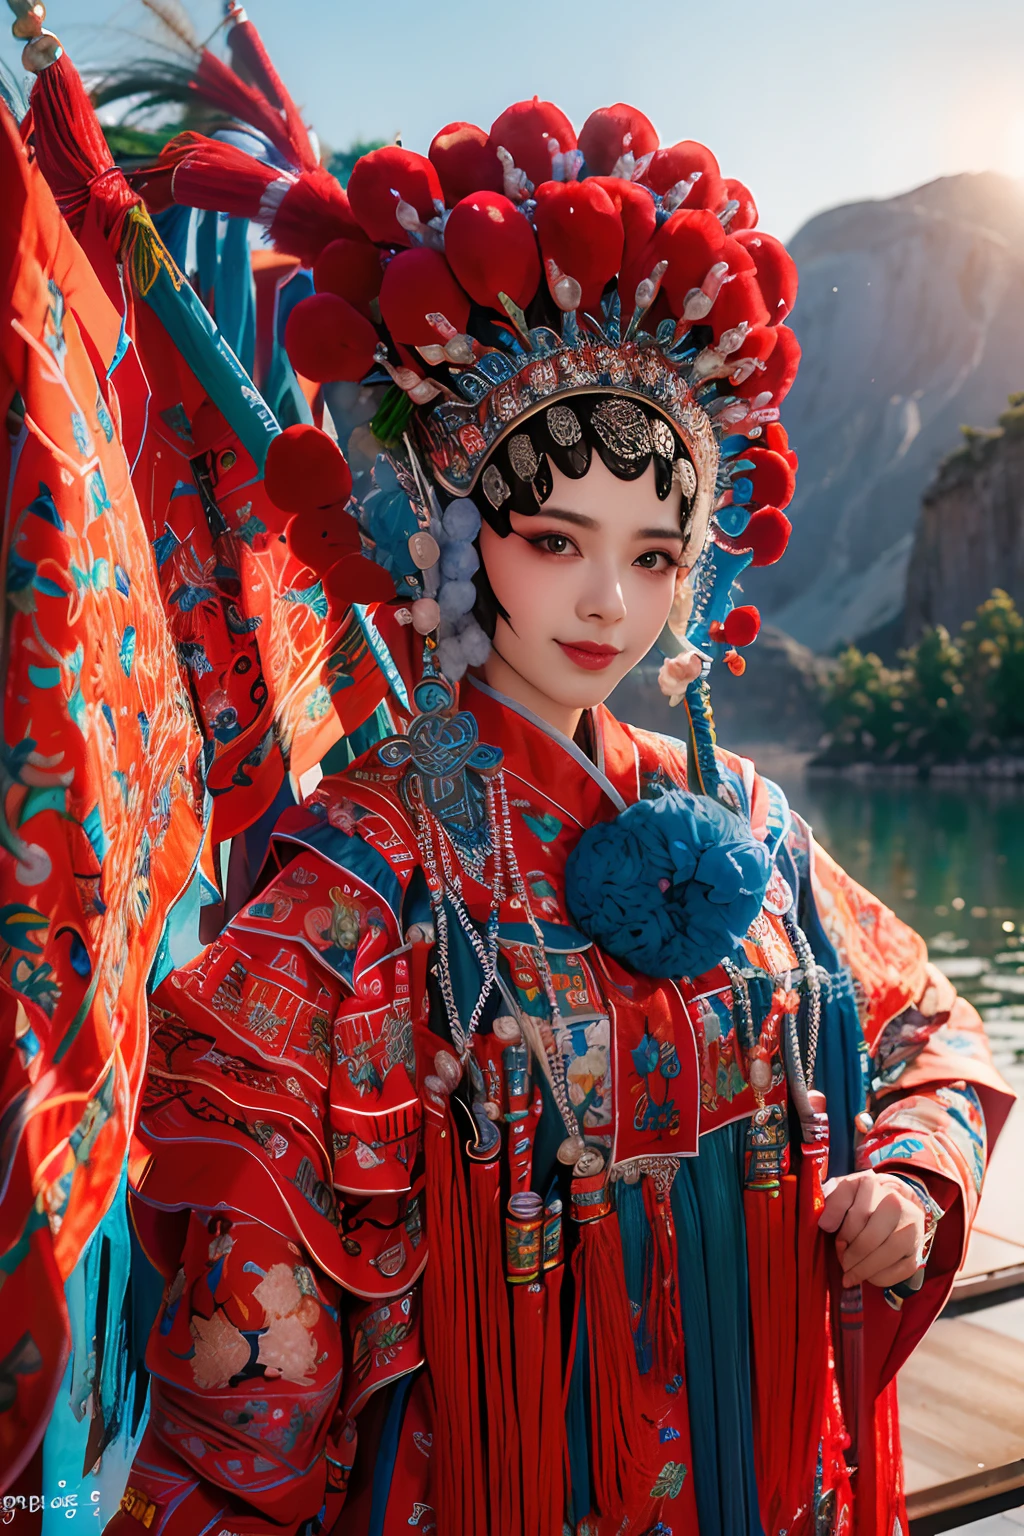 8K，RAW photos，best qualtiy，tmasterpiece，realisticlying，photograph realistic，ultra - detailed， 1 girl，CNOperaCrown，solo，sportrait， Peking Opera costumes，looking at viewert， ssmile， Keep one's mouth shut， From the front， putting makeup on， head gear， （（（CNOperaFlag）））， The flag is from behind，  The upper part of the body， nipple tassels，florals，（Daumadan：1.4），（simple backgound：1.5），